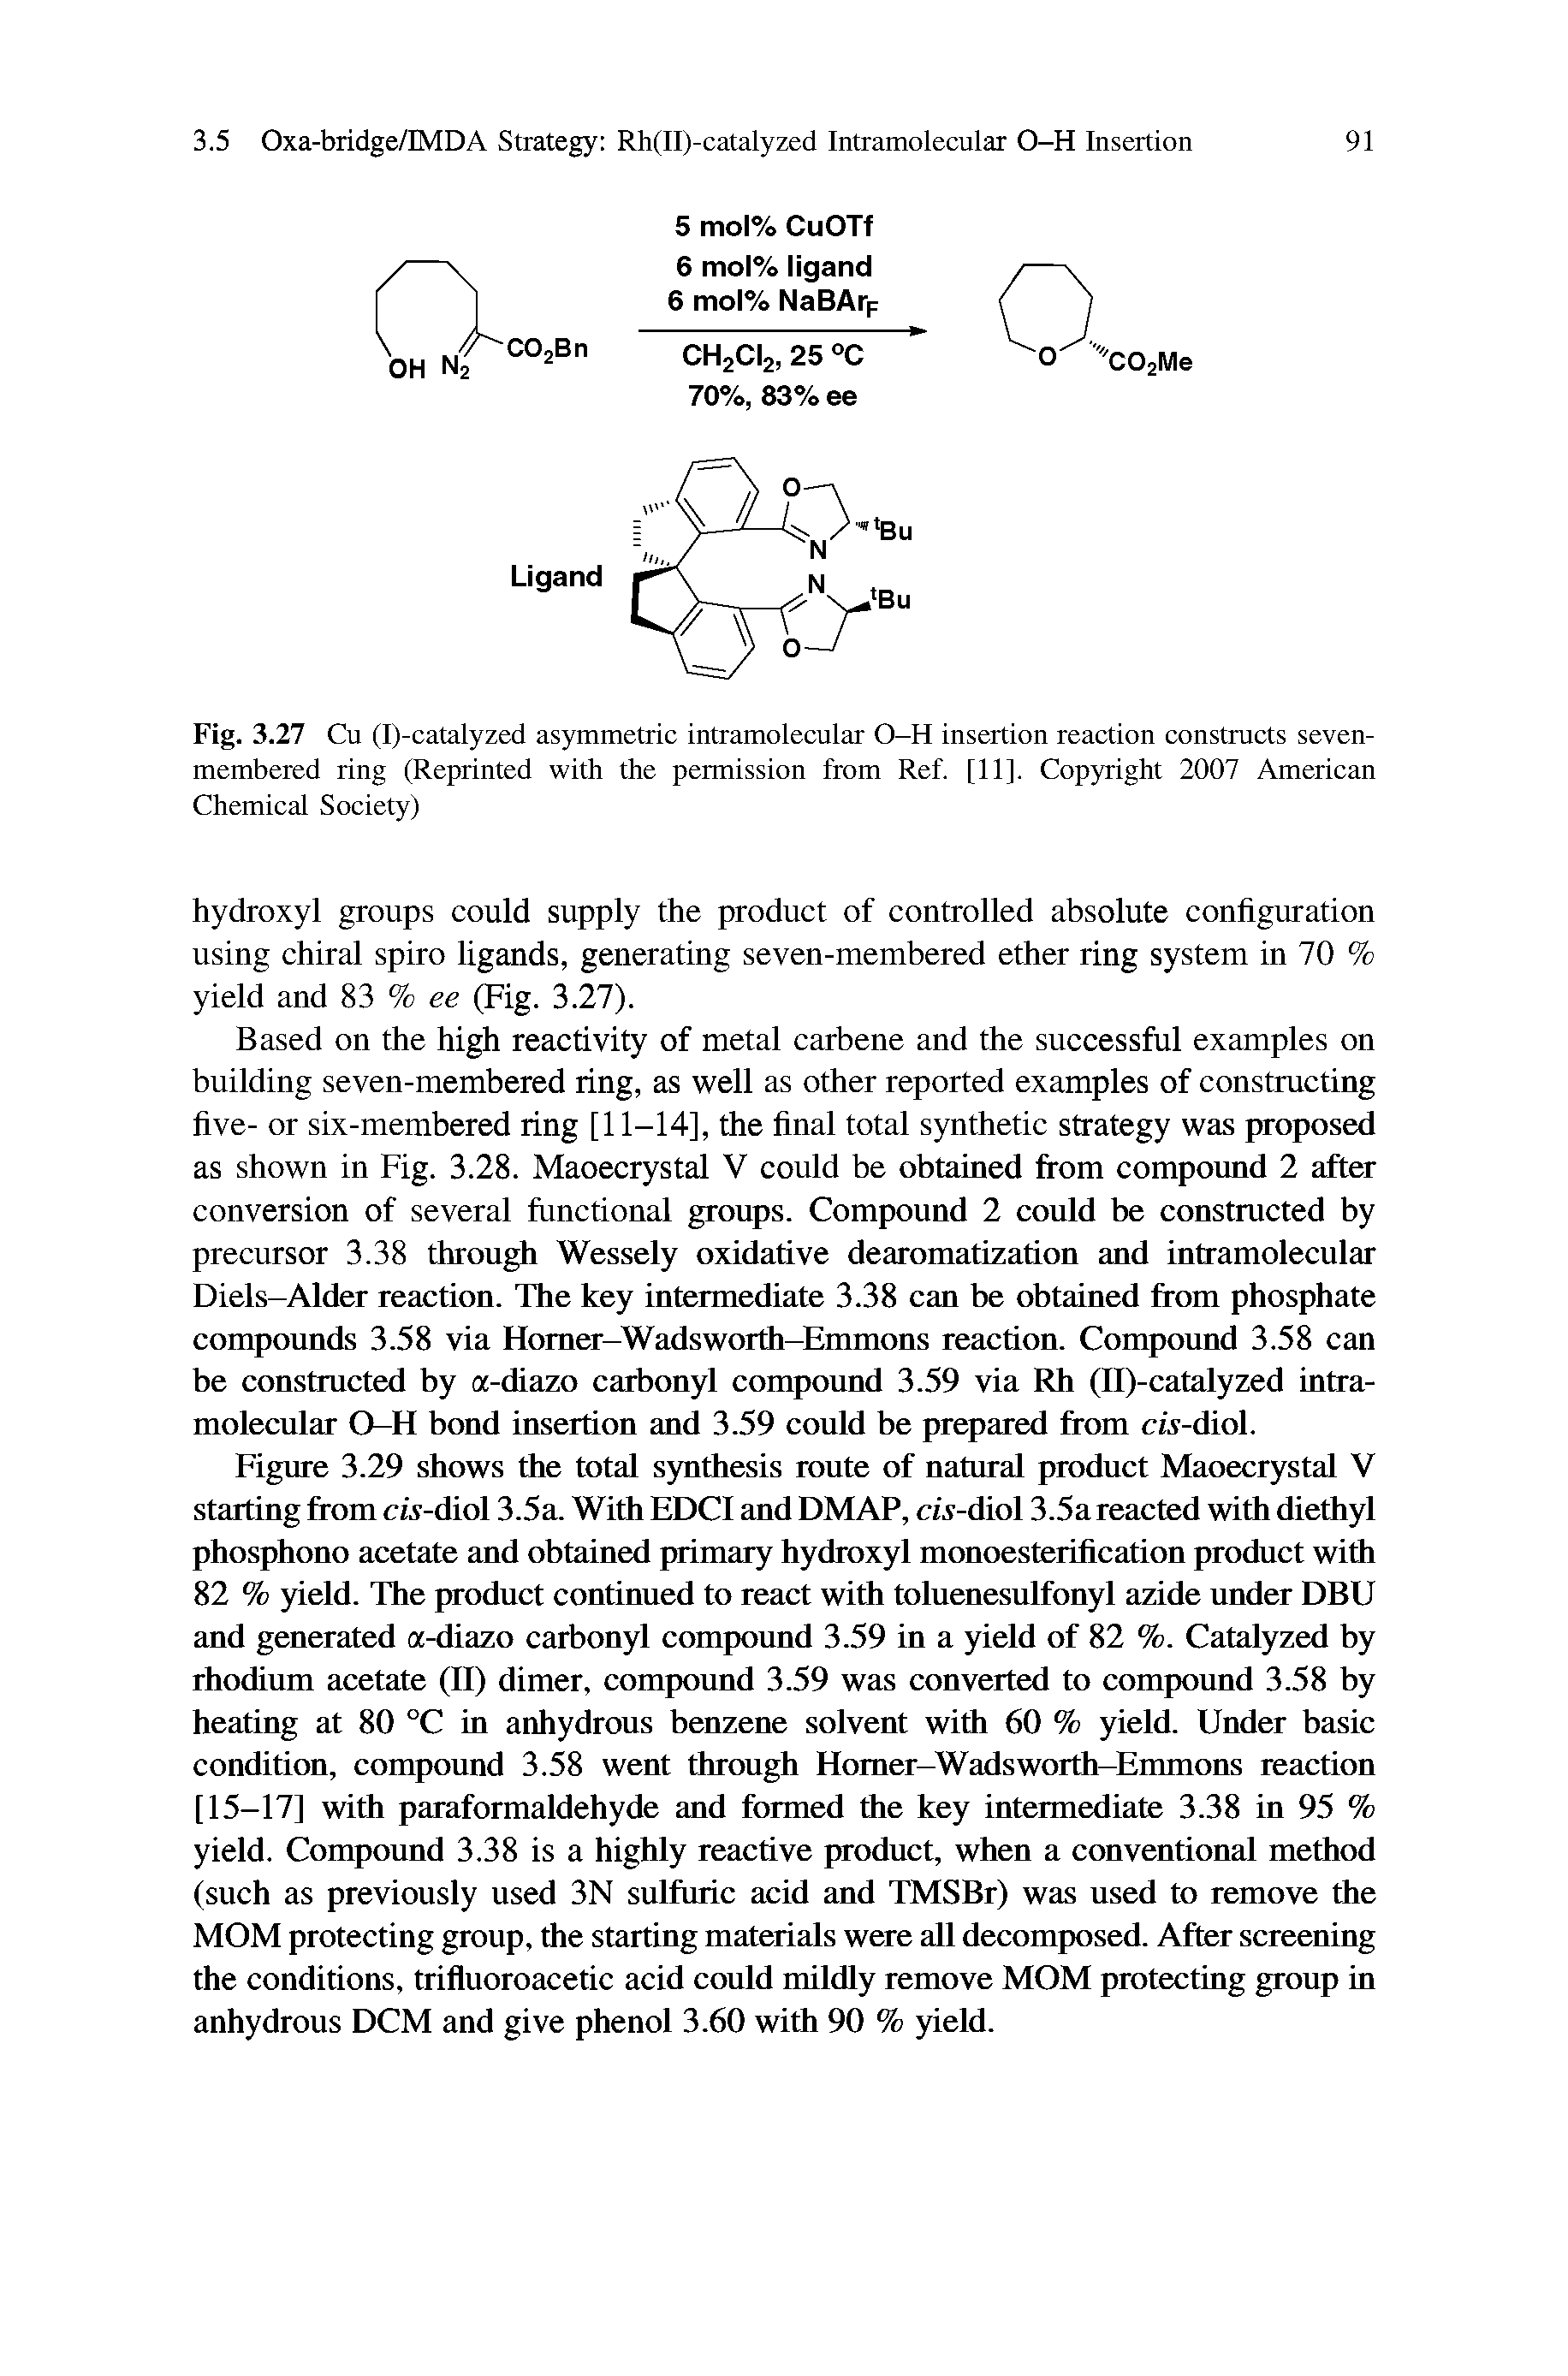 Fig. 3.27 Cu (I)-catalyzed asymmetric intramolecular O-H insertion reaction constructs seven-membered ring (Reprinted with the permission from Ref. [11]. Copyright 2007 American Chemical Society)...